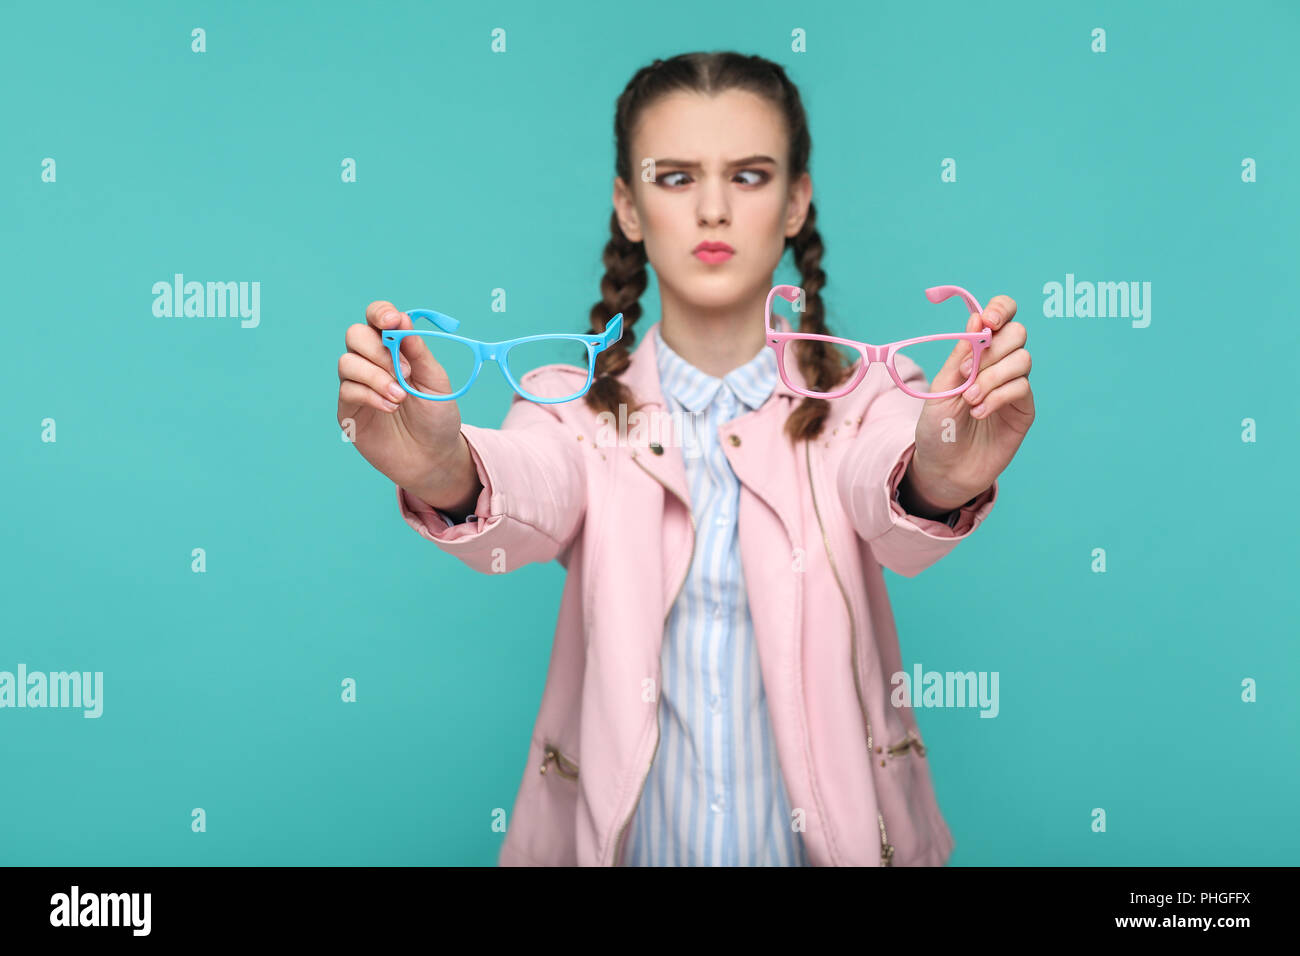 doubtful funny girl in casual or hipster style, pigtail hairstyle, standing, holding blue and pink glasses and looking at camera with crossed eye, Ind Stock Photo